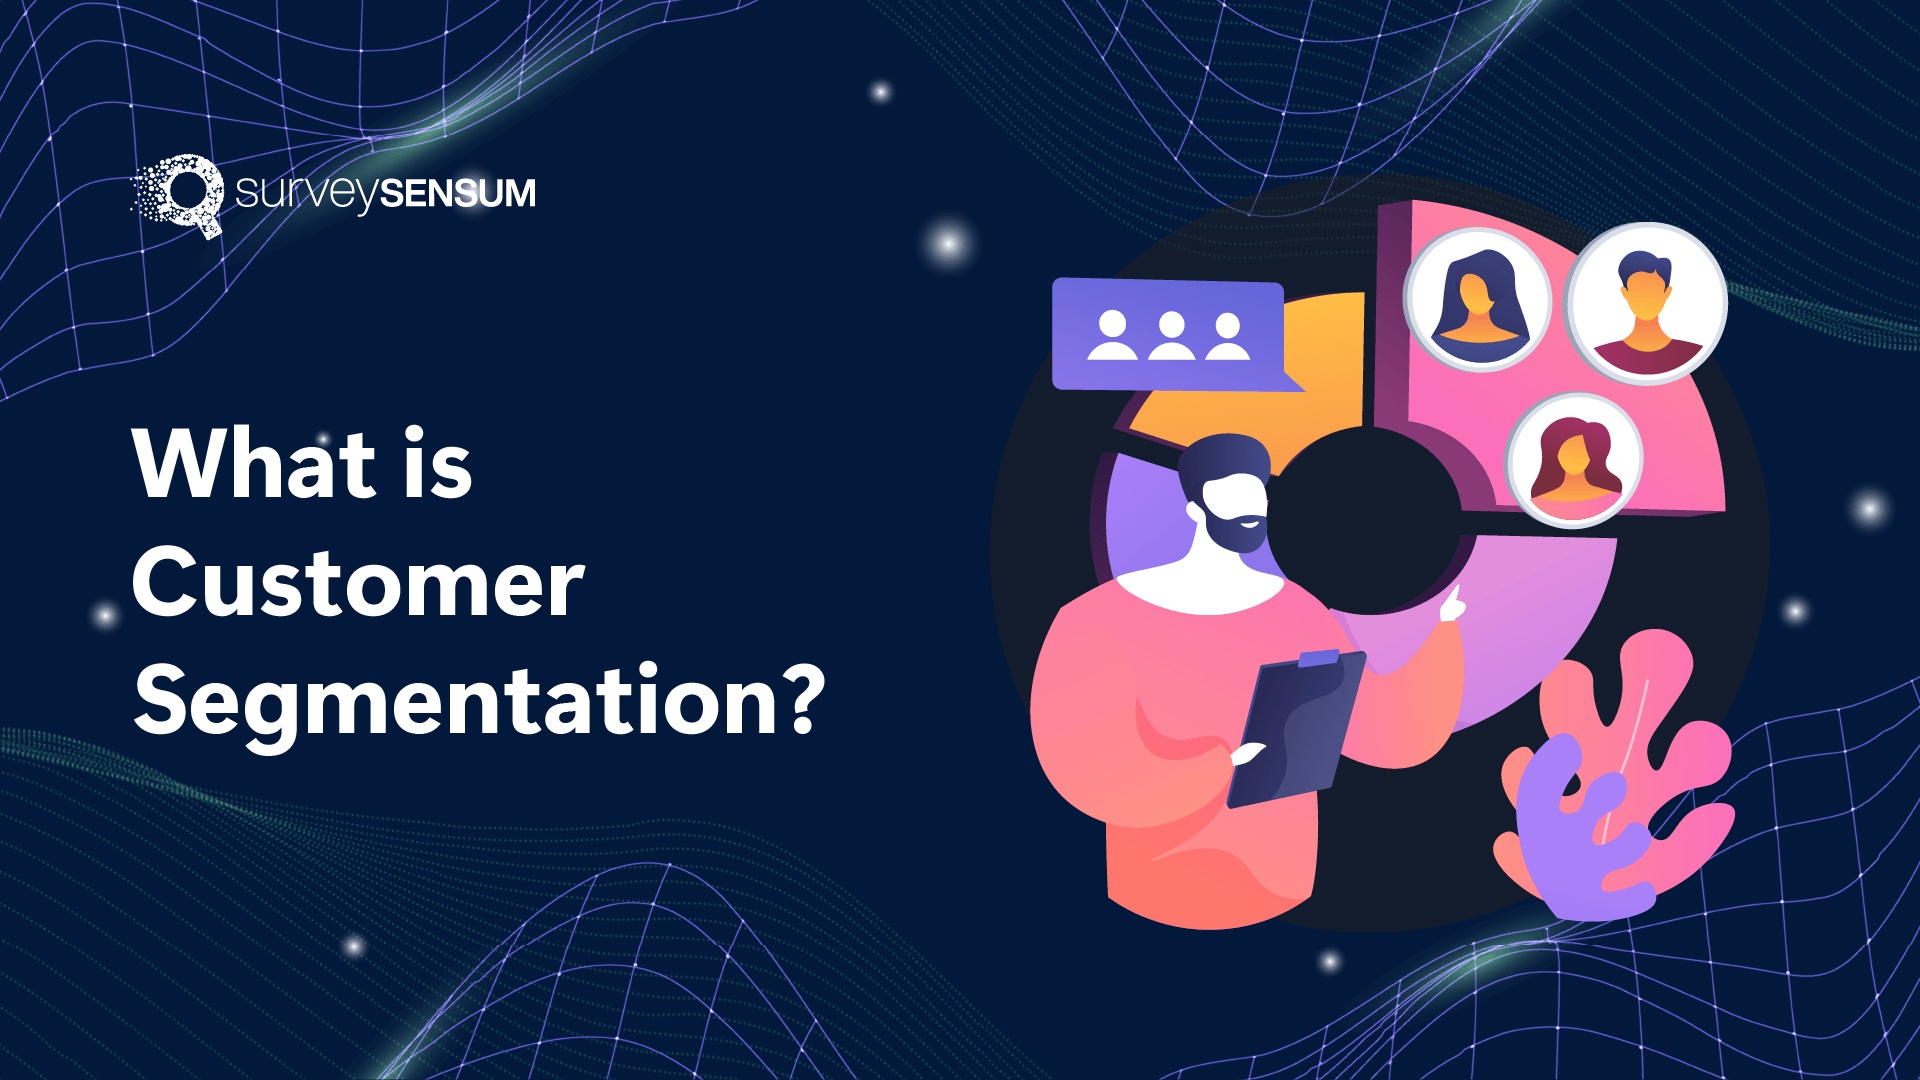 Everything you need to know about Customer Segmentation